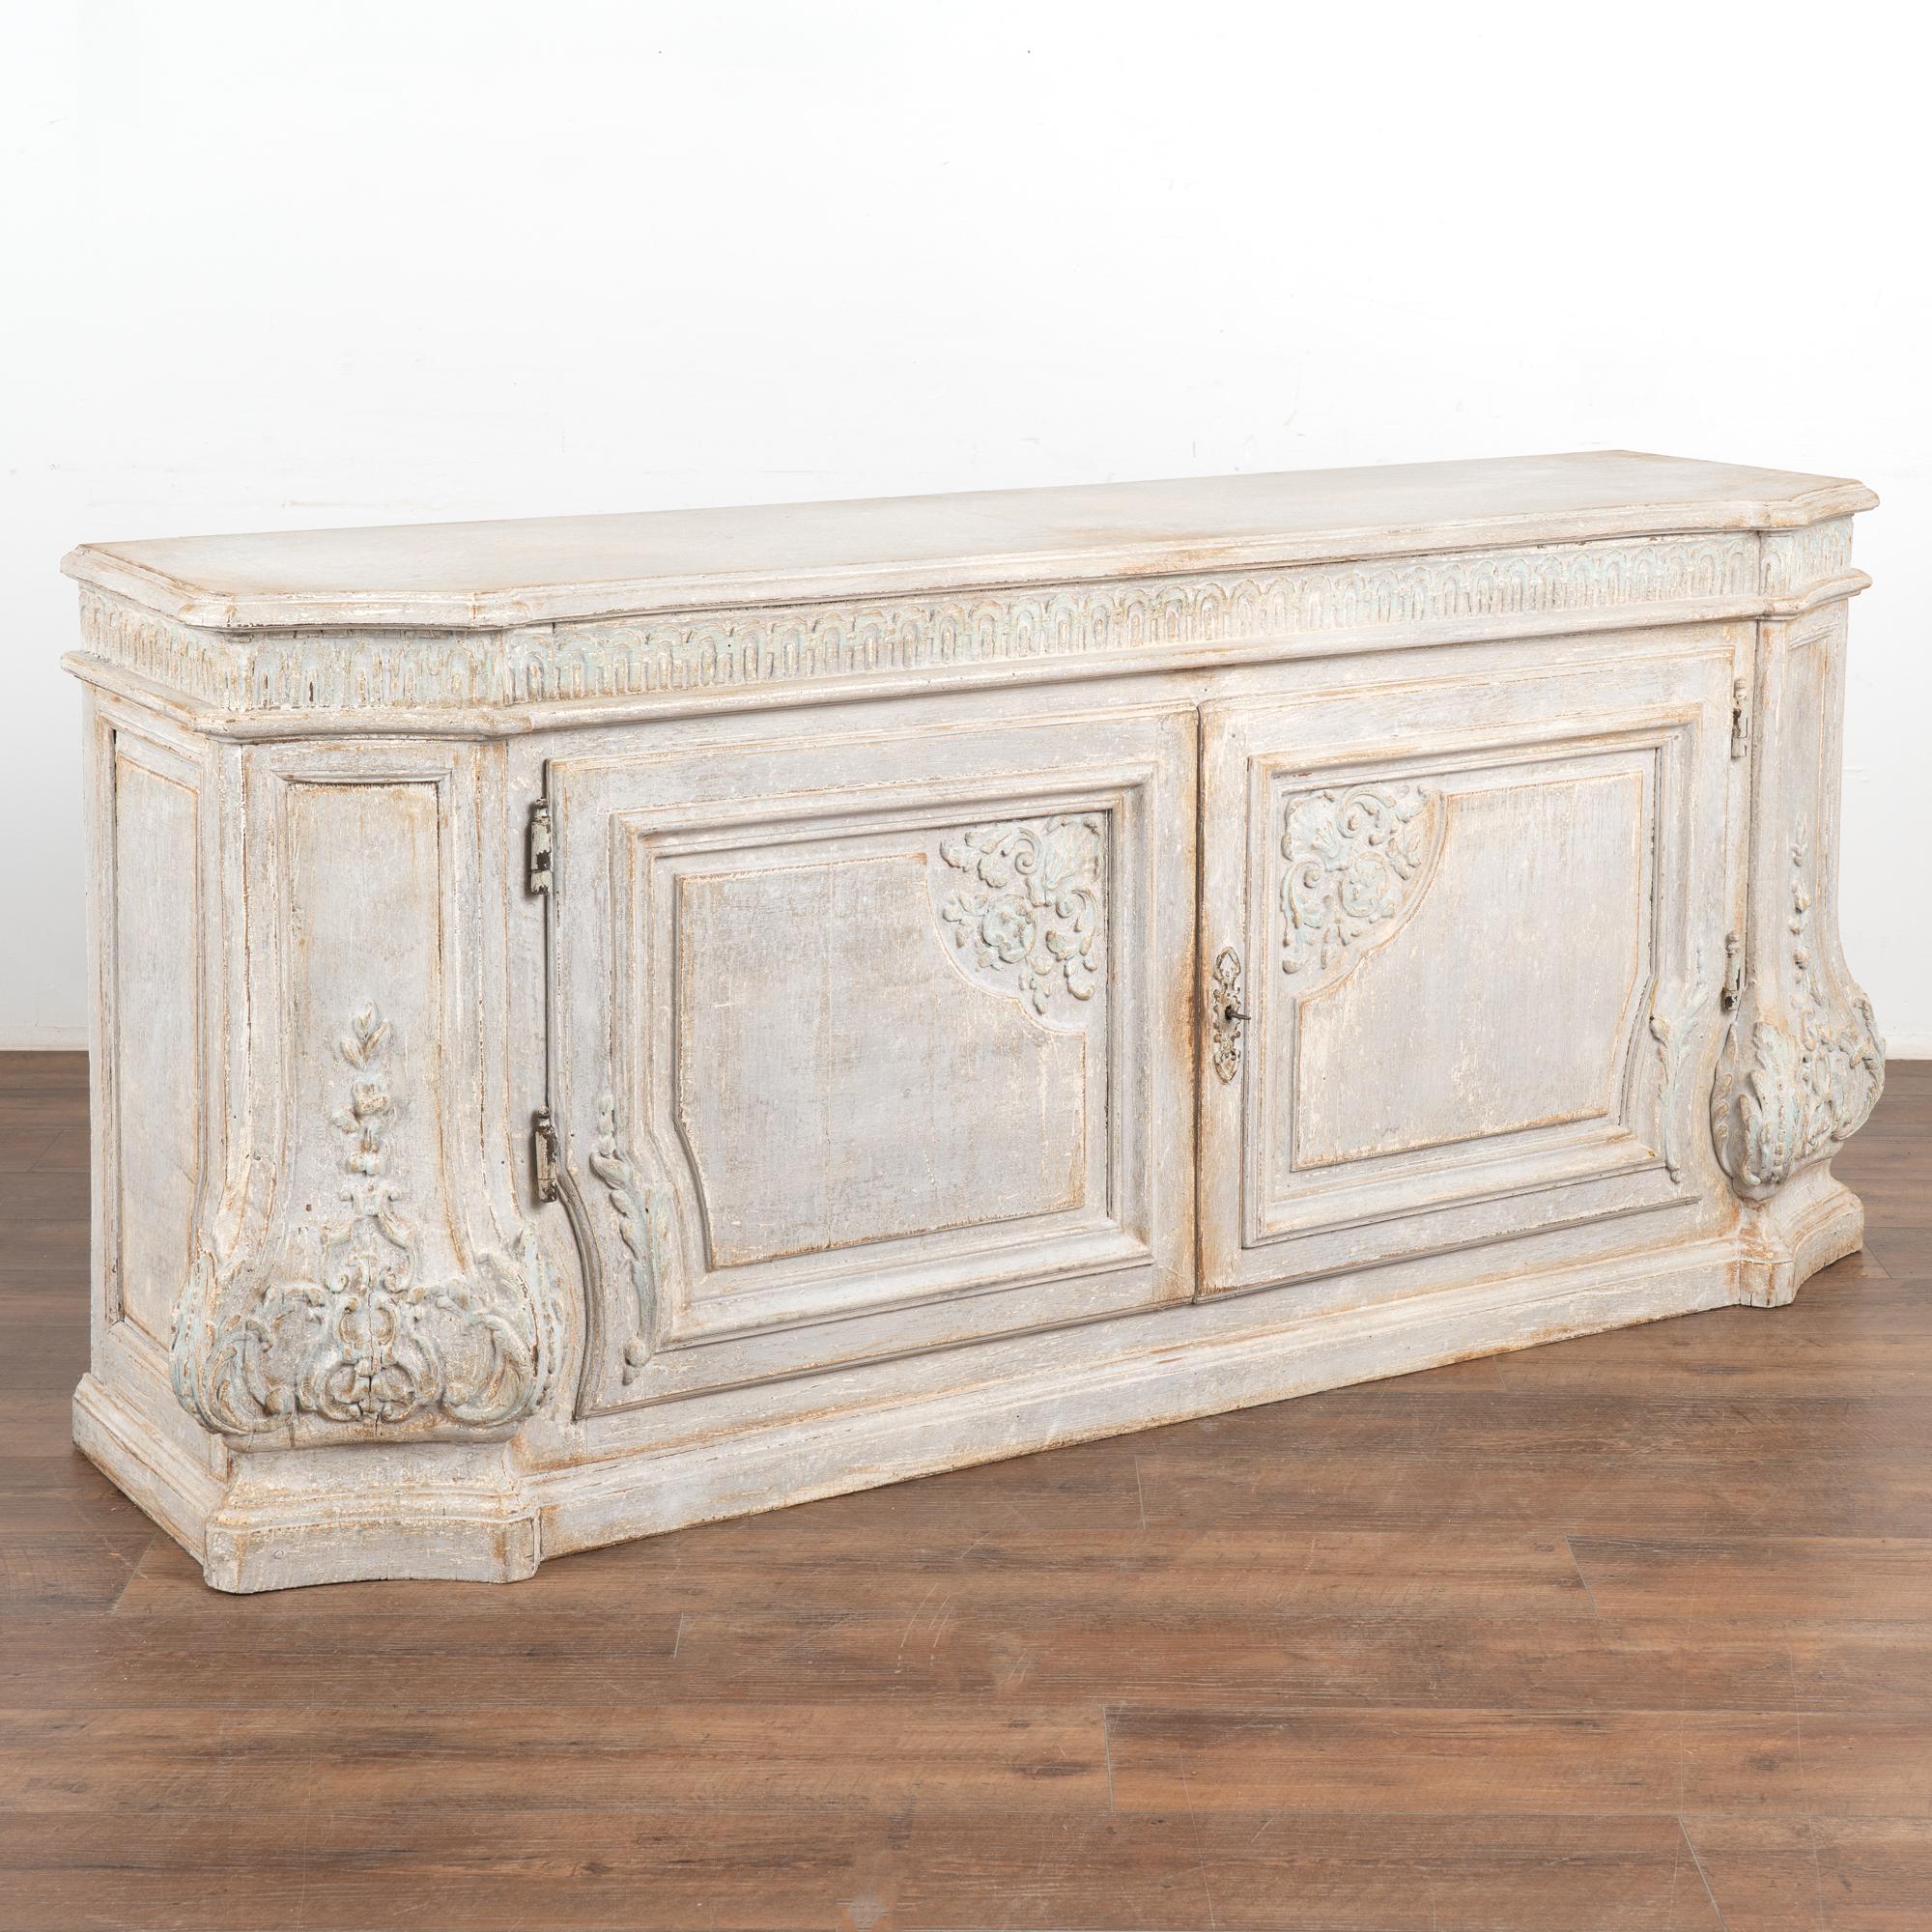 This large Italian oak sideboard has beautifully carved details. At 6' long, this will serve as an impressive buffet or console.
Please enlarge photos to appreciate the newer professionally applied and layered pale blue and soft antique gray which